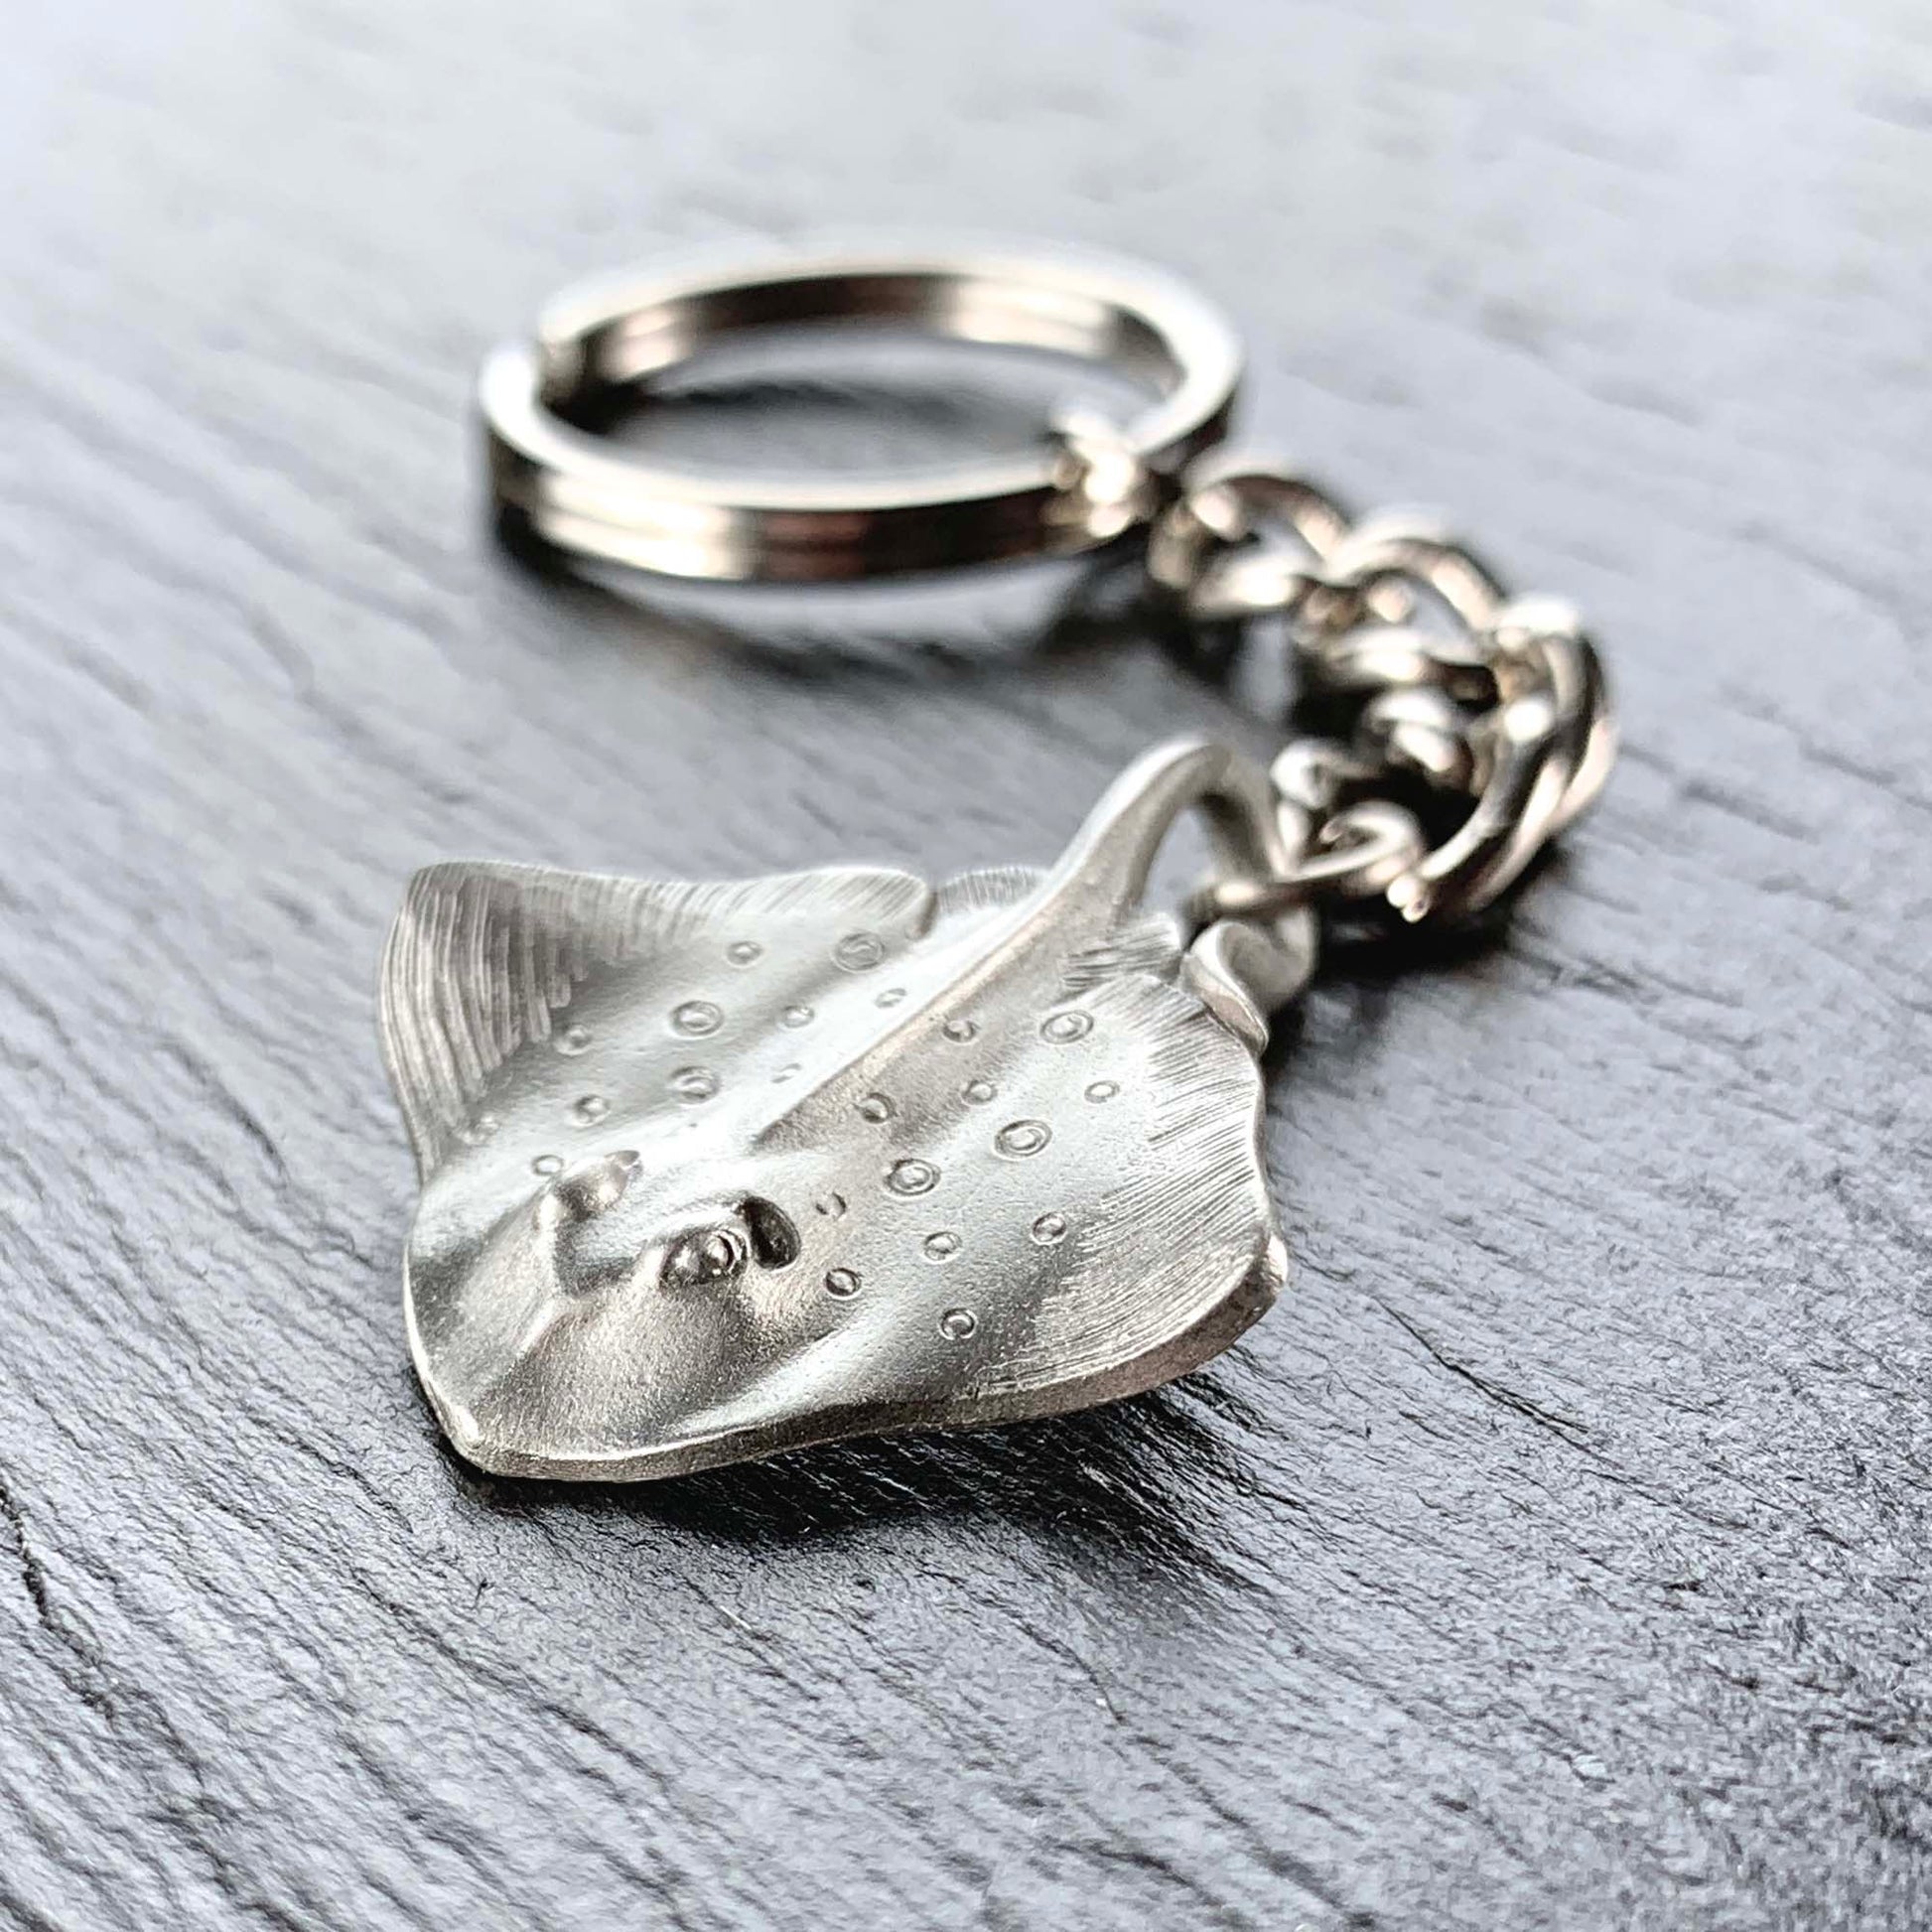 Stingray Keychain for Women and Men- Stingray Gifts for Women, Stingray Key Ring, Stingray Charm, Gifts for Scuba Divers, Sea Life Keychain - The Tool Store